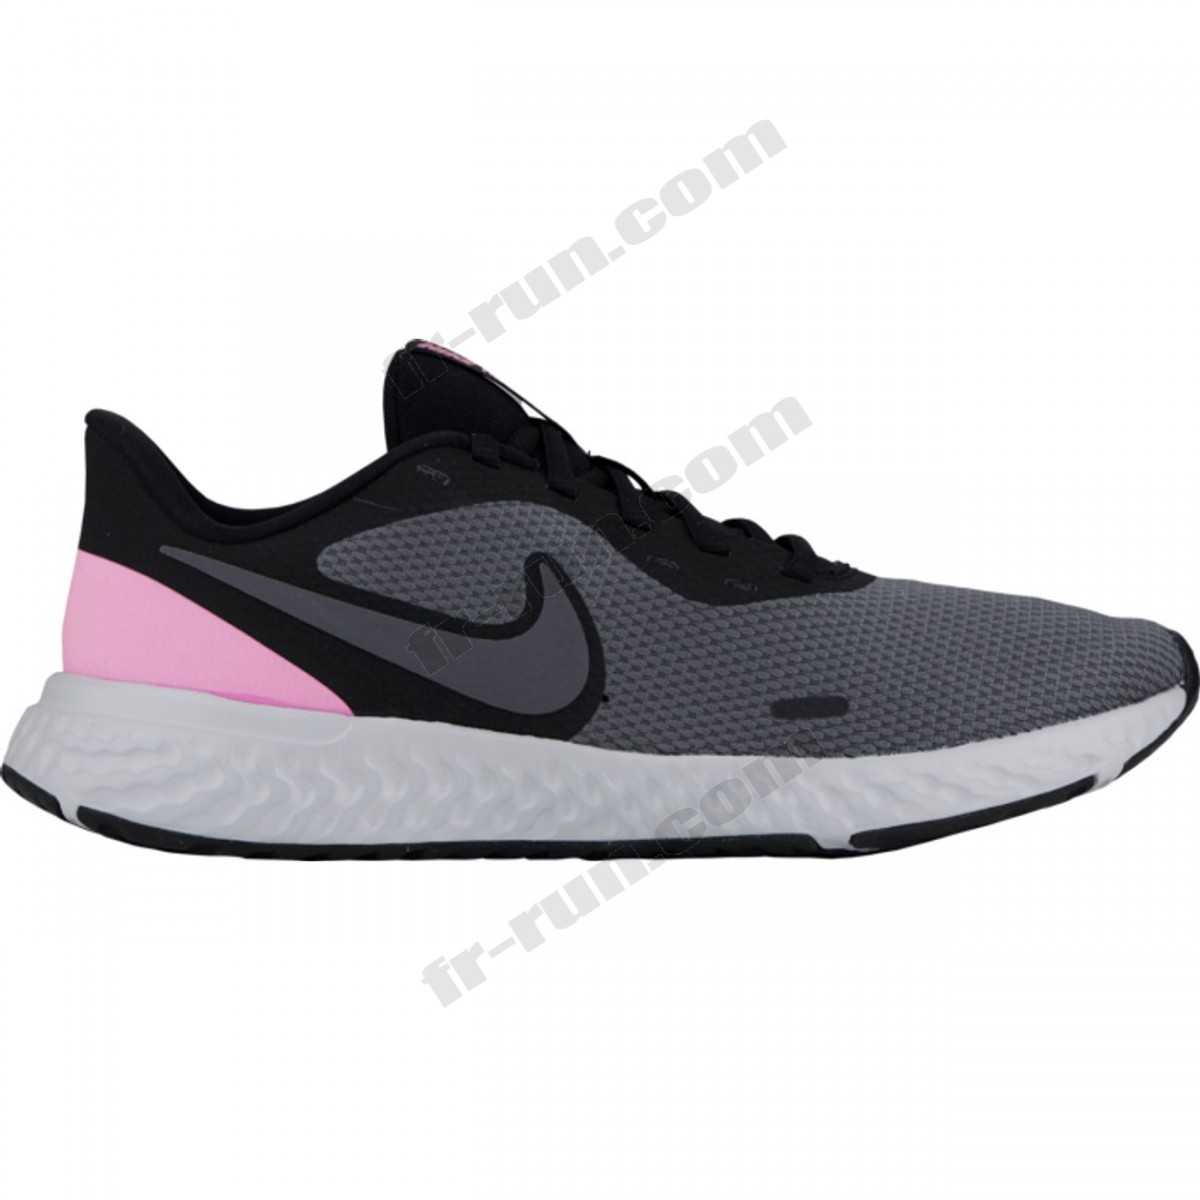 Nike/CHAUSSURES BASSES running femme NIKE WMNS NIKE REVOLUTION 5 √ Nouveau style √ Soldes - Nike/CHAUSSURES BASSES running femme NIKE WMNS NIKE REVOLUTION 5 √ Nouveau style √ Soldes